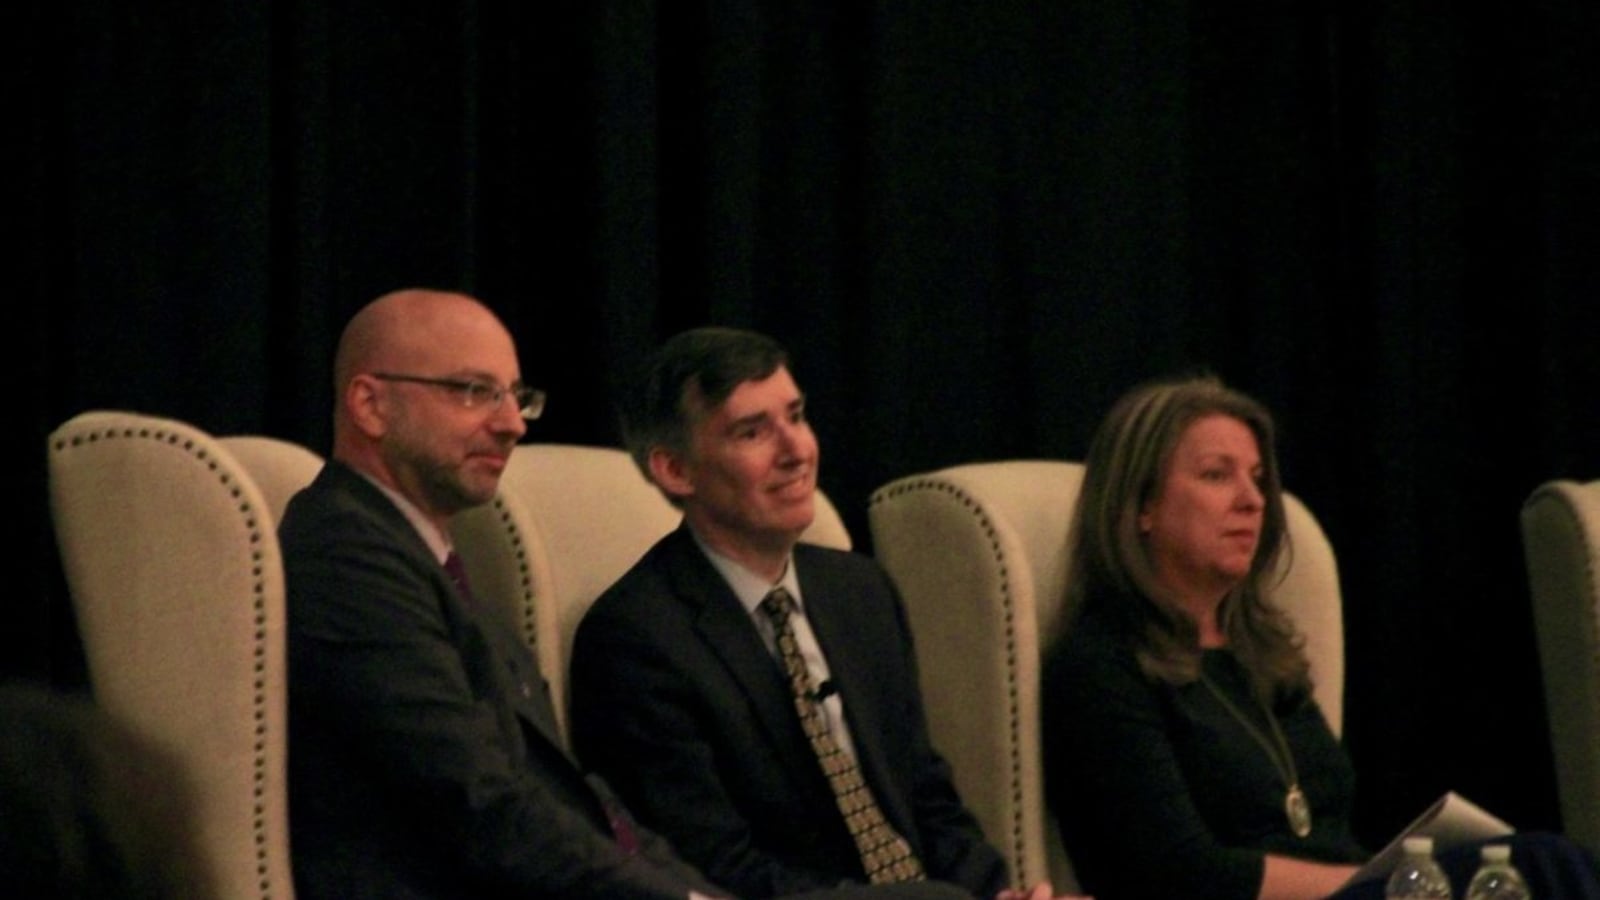 Chris Barbic (left) speaks at panel alongside Mark Gleason of the Philadelphia School Partnership and Mary Seawell of the Gates Family Foundation. Barbic returned to Memphis for a forum on K-12 philanthropy.